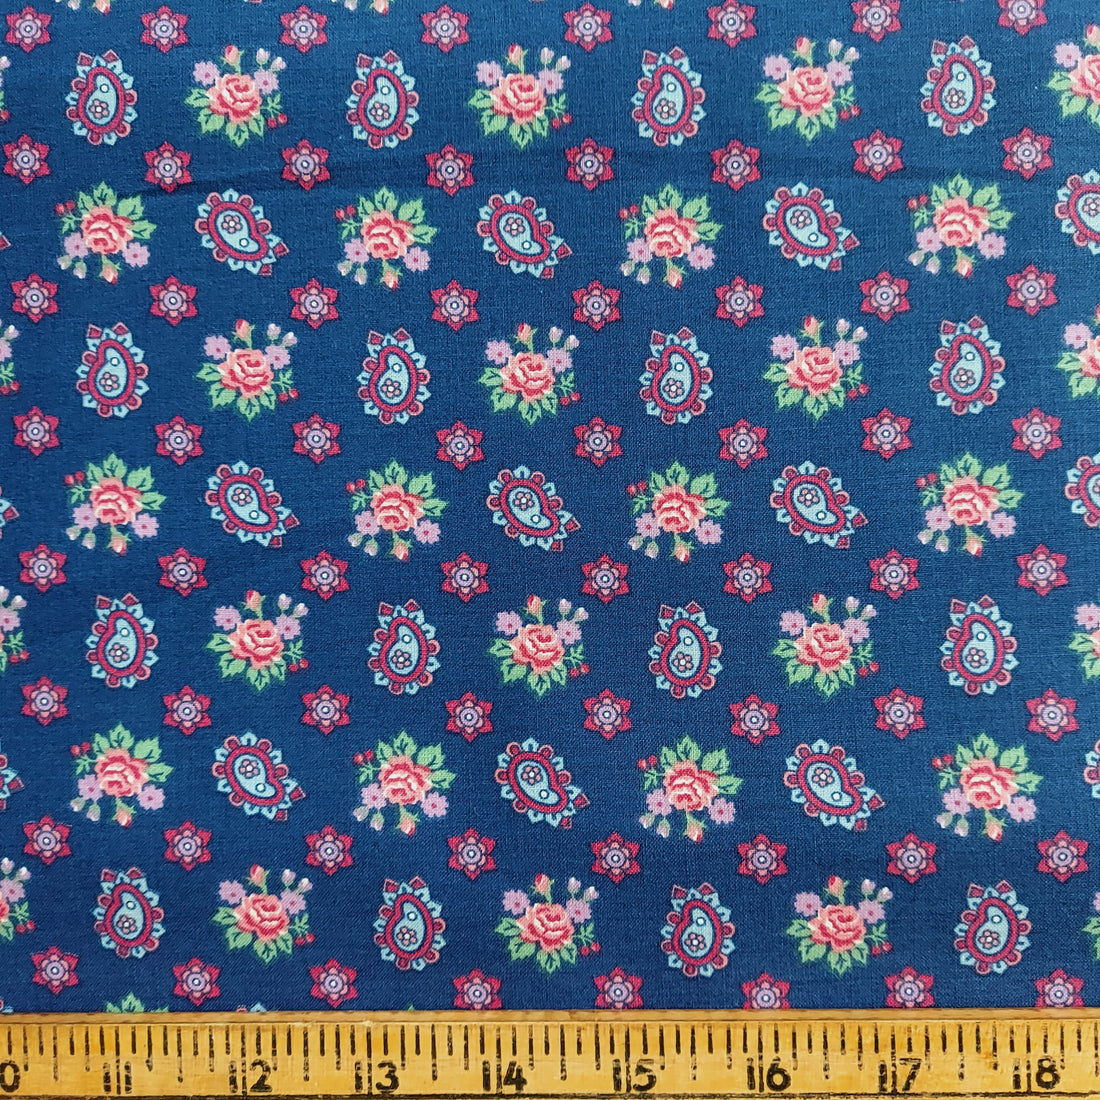 Fabric Country Paisley Rose Navy